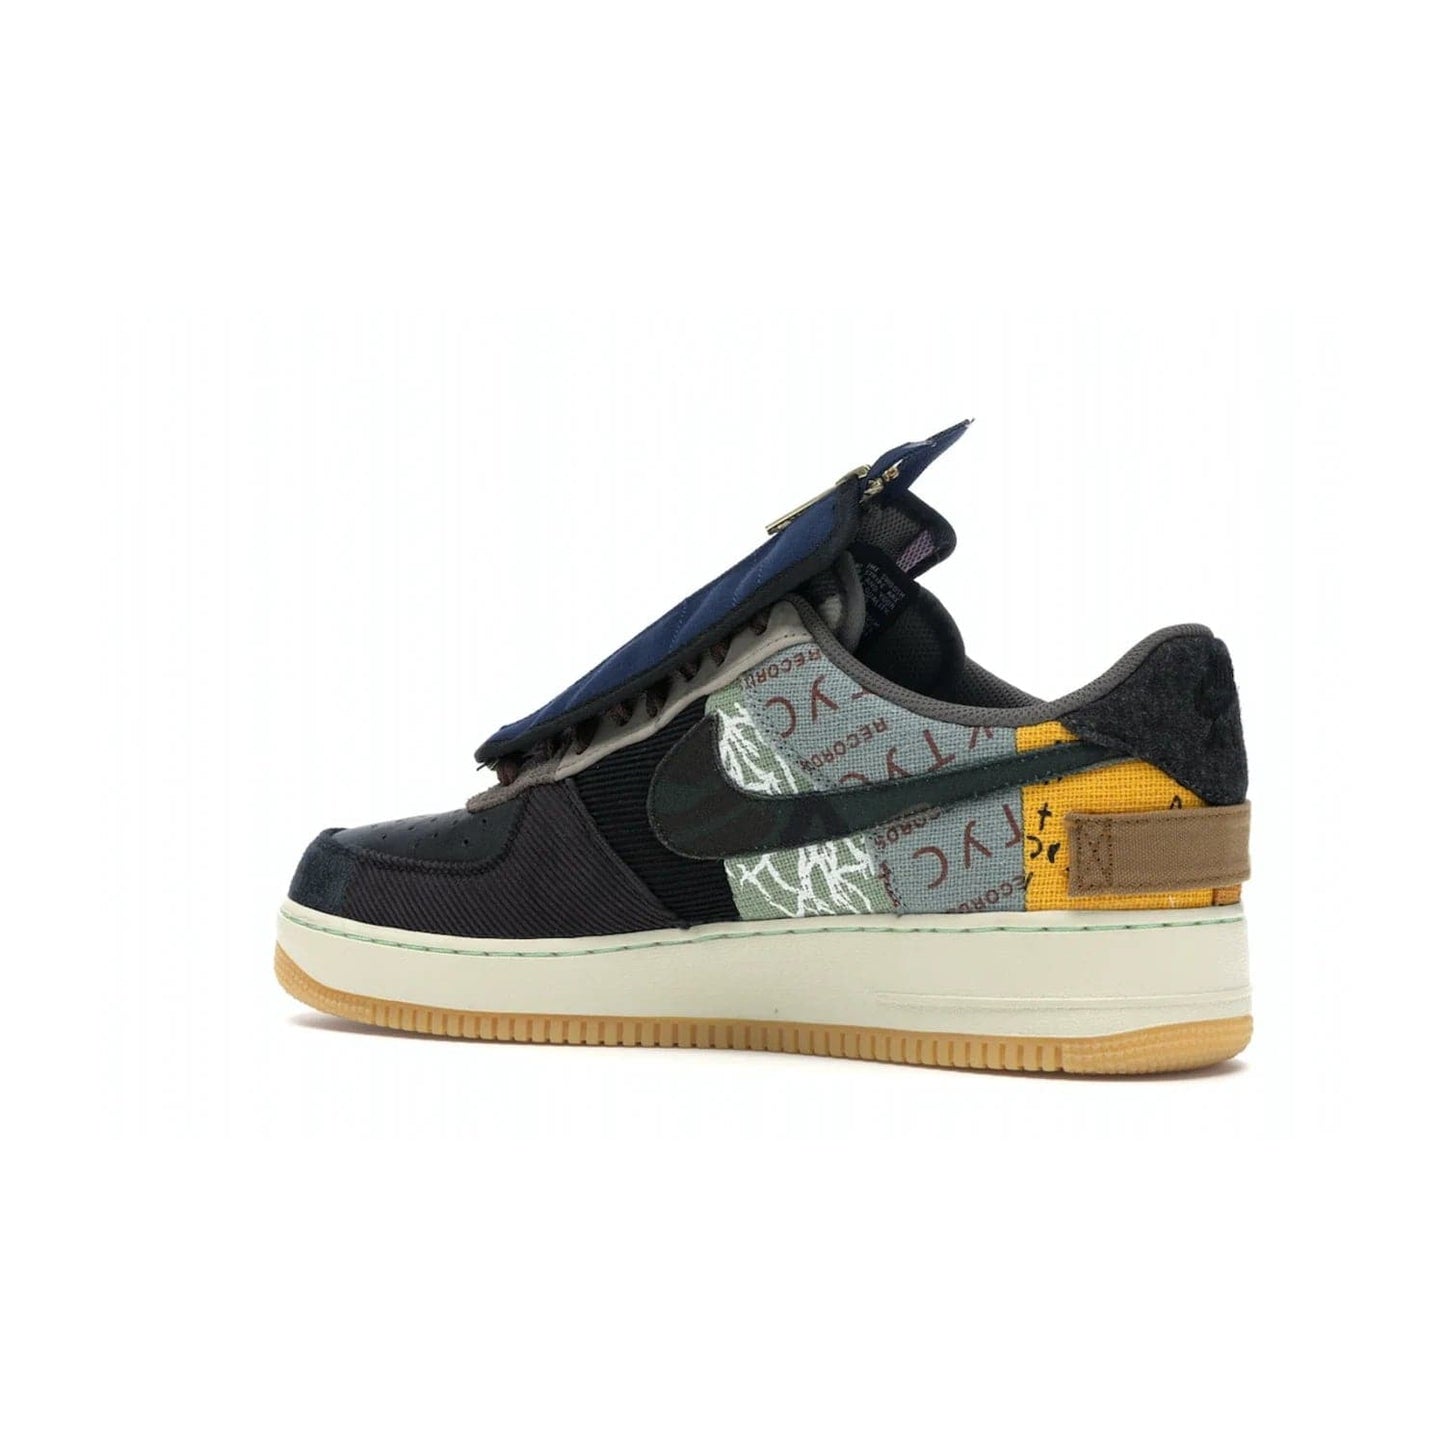 Nike Air Force 1 Low Travis Scott Cactus Jack - Image 22 - Only at www.BallersClubKickz.com - The Nike Air Force 1 Low Travis Scott Cactus Jack features a unique, multi-colored patchwork upper with muted bronze and fossil accents. Includes detachable lace cover, brass zipper, and Cactus Jack insignias. A sail midsole, gum rubber outsole complete the eye-catching design. Perfect for comfort and style with unexpected touches of detail.